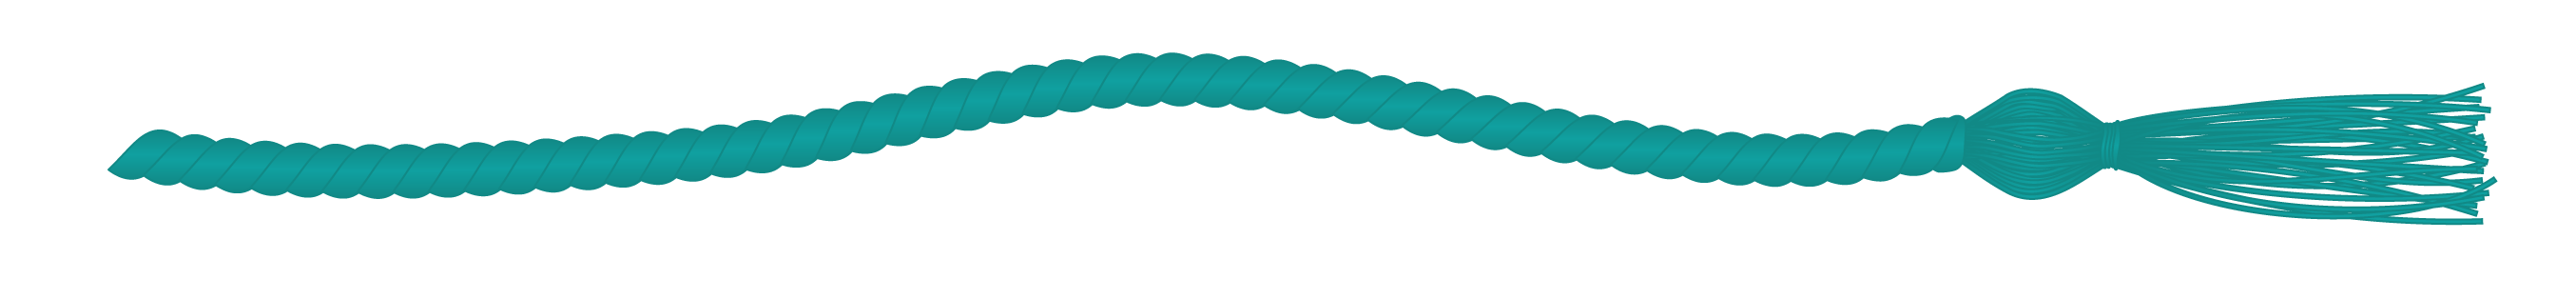 Teal commencement cord